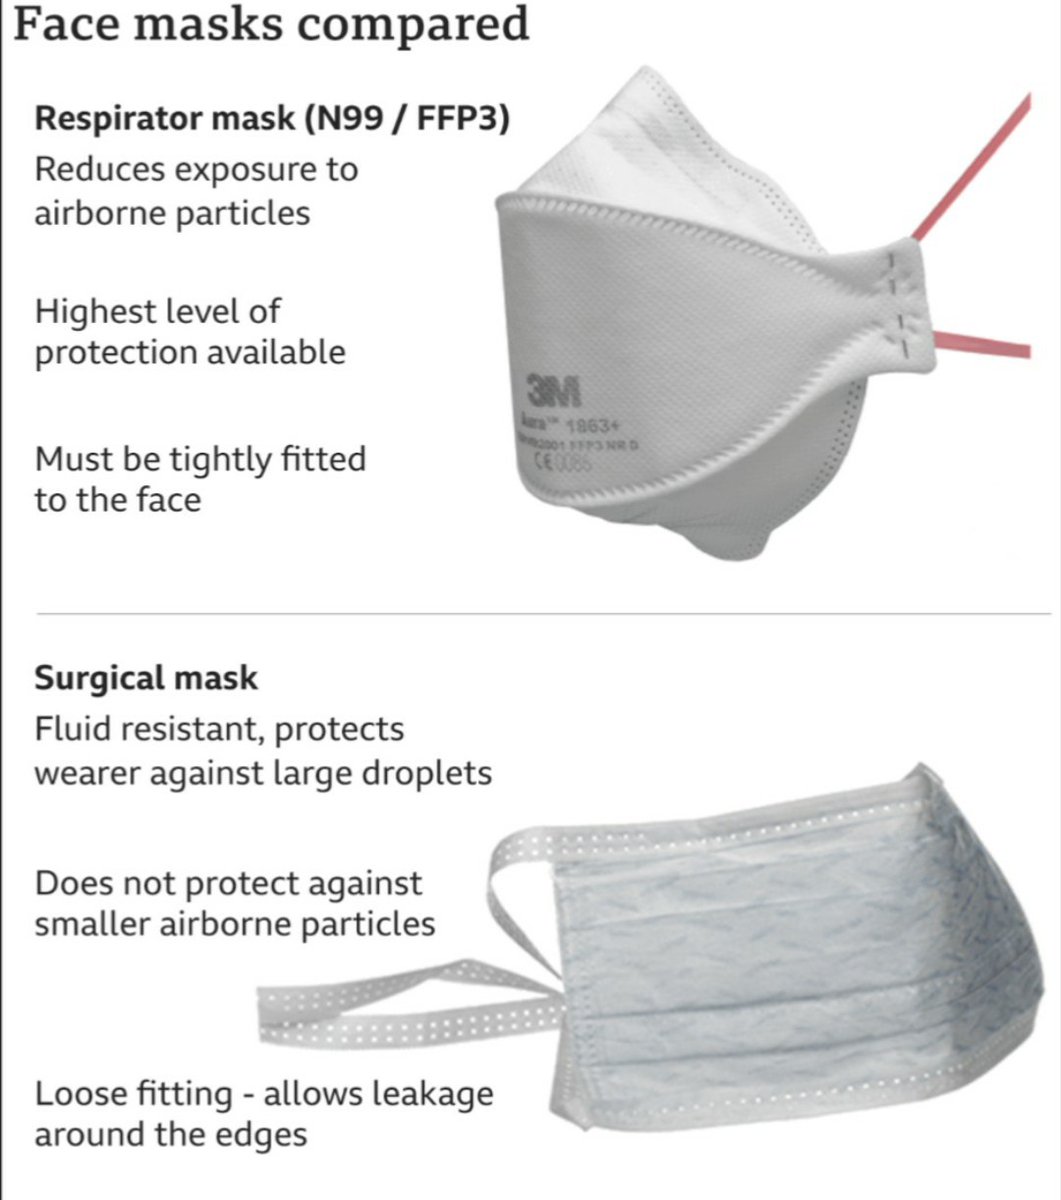 @CleanAirClassrm @russellviner Mask?
Surgical Masks are only about 10% affective against #COVIDisAirborne became of poor fitting ie around the edges and the filtration of the Mask itself is less that adequate compared to an FFP2/N95 Respirator. Better still is FFP3/N99
NB #CovidIsNotOver!!